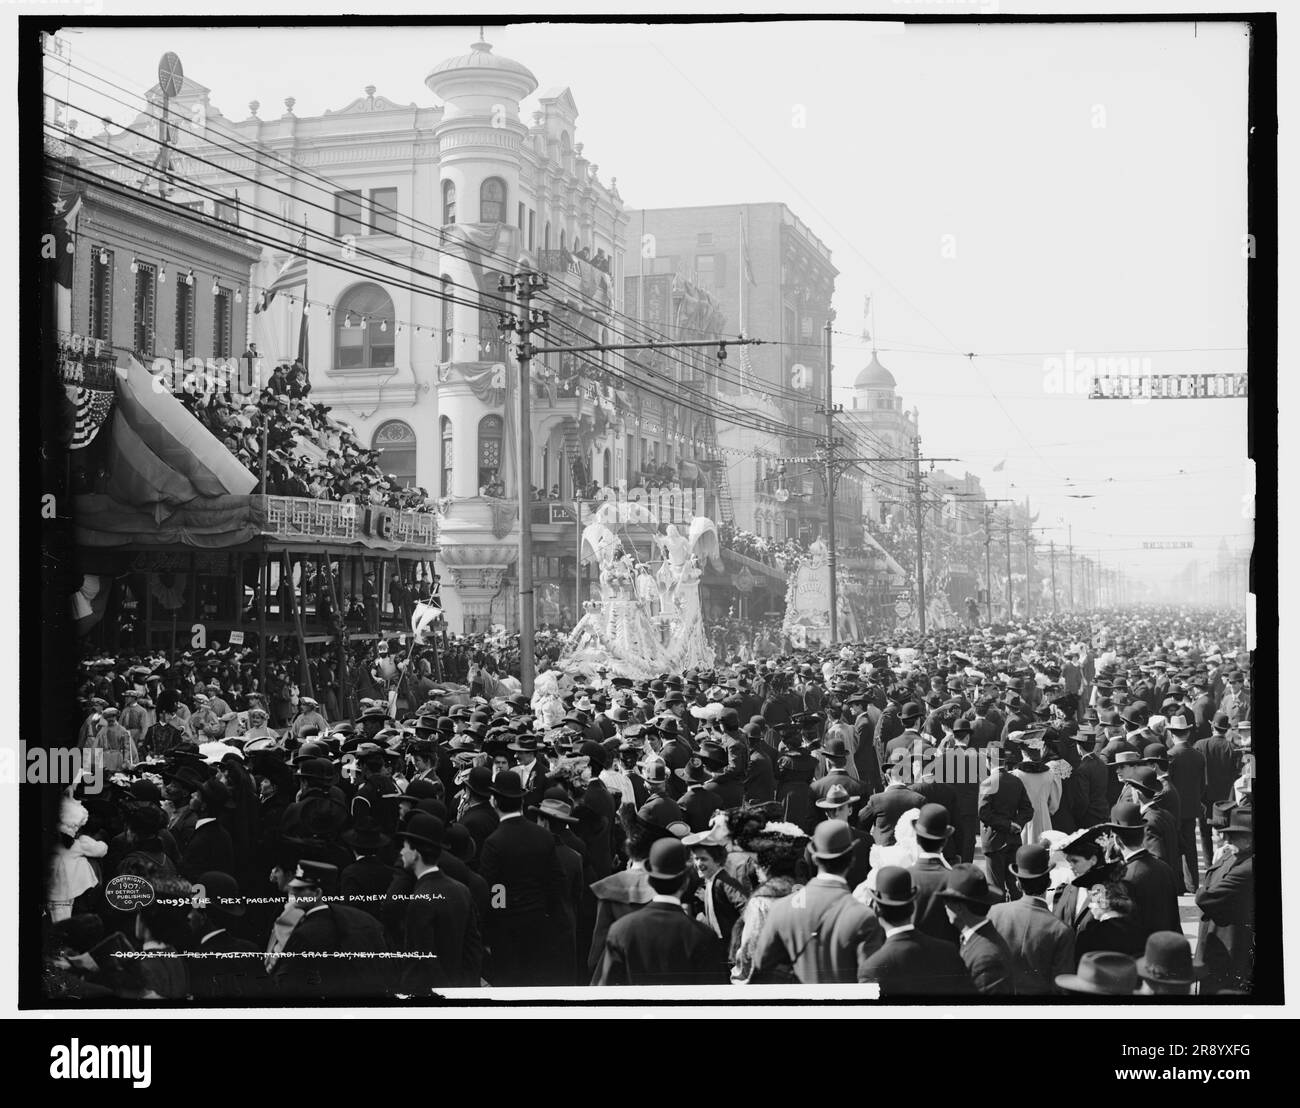 The Rex pageant, Mardi Gras Day, New Orleans, La., c1907. The 'Rex' character reigns as 'The King of Carnival' during annual Mardi Gras festivities. Stock Photo